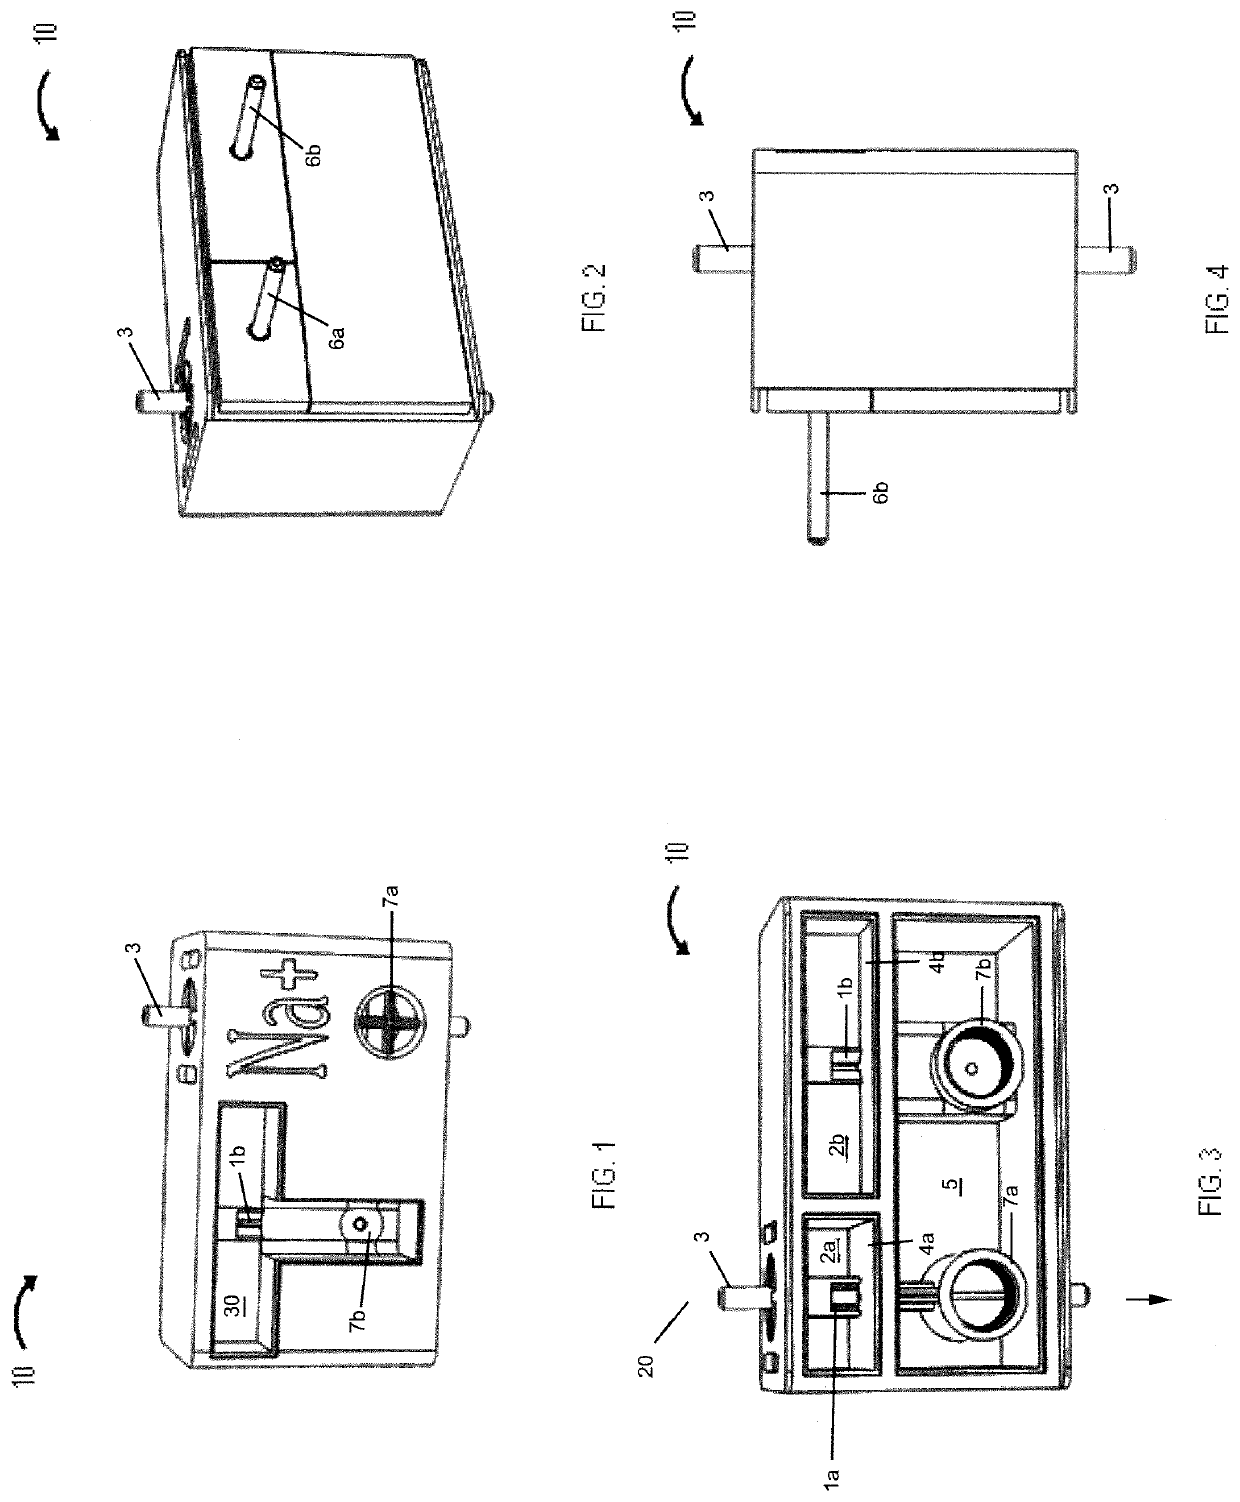 Apparatus for measuring water hardness using ion selective electrode